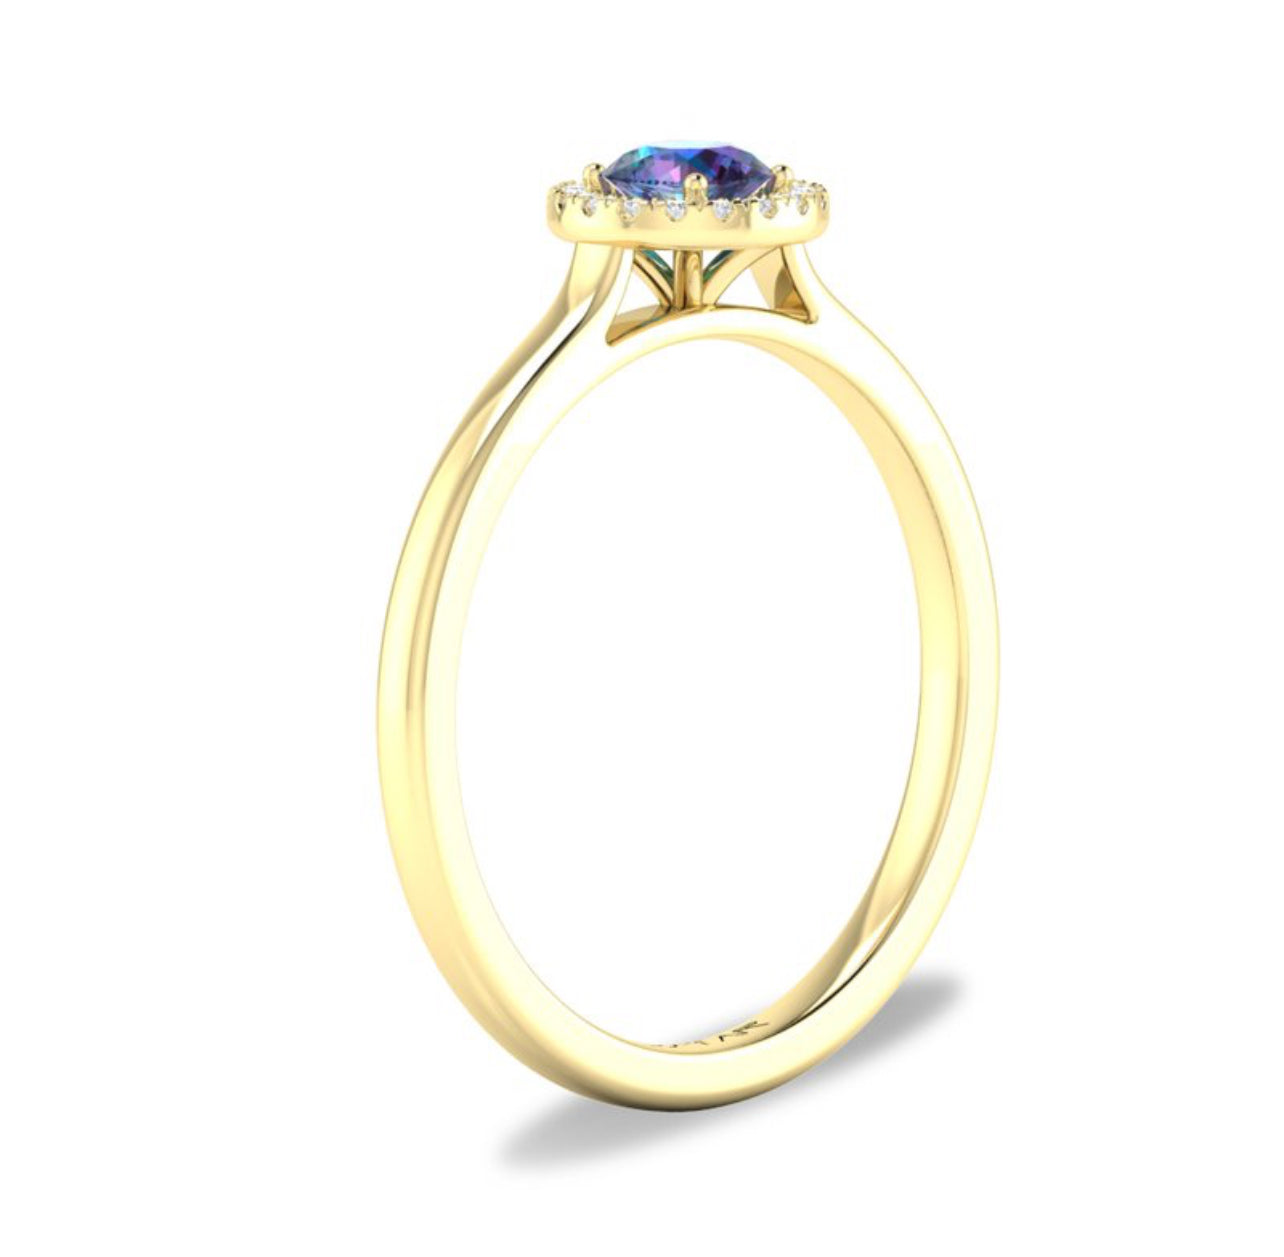 10K or 14K White or Yellow Gold Created Alexandrite and Diamond Halo Ring